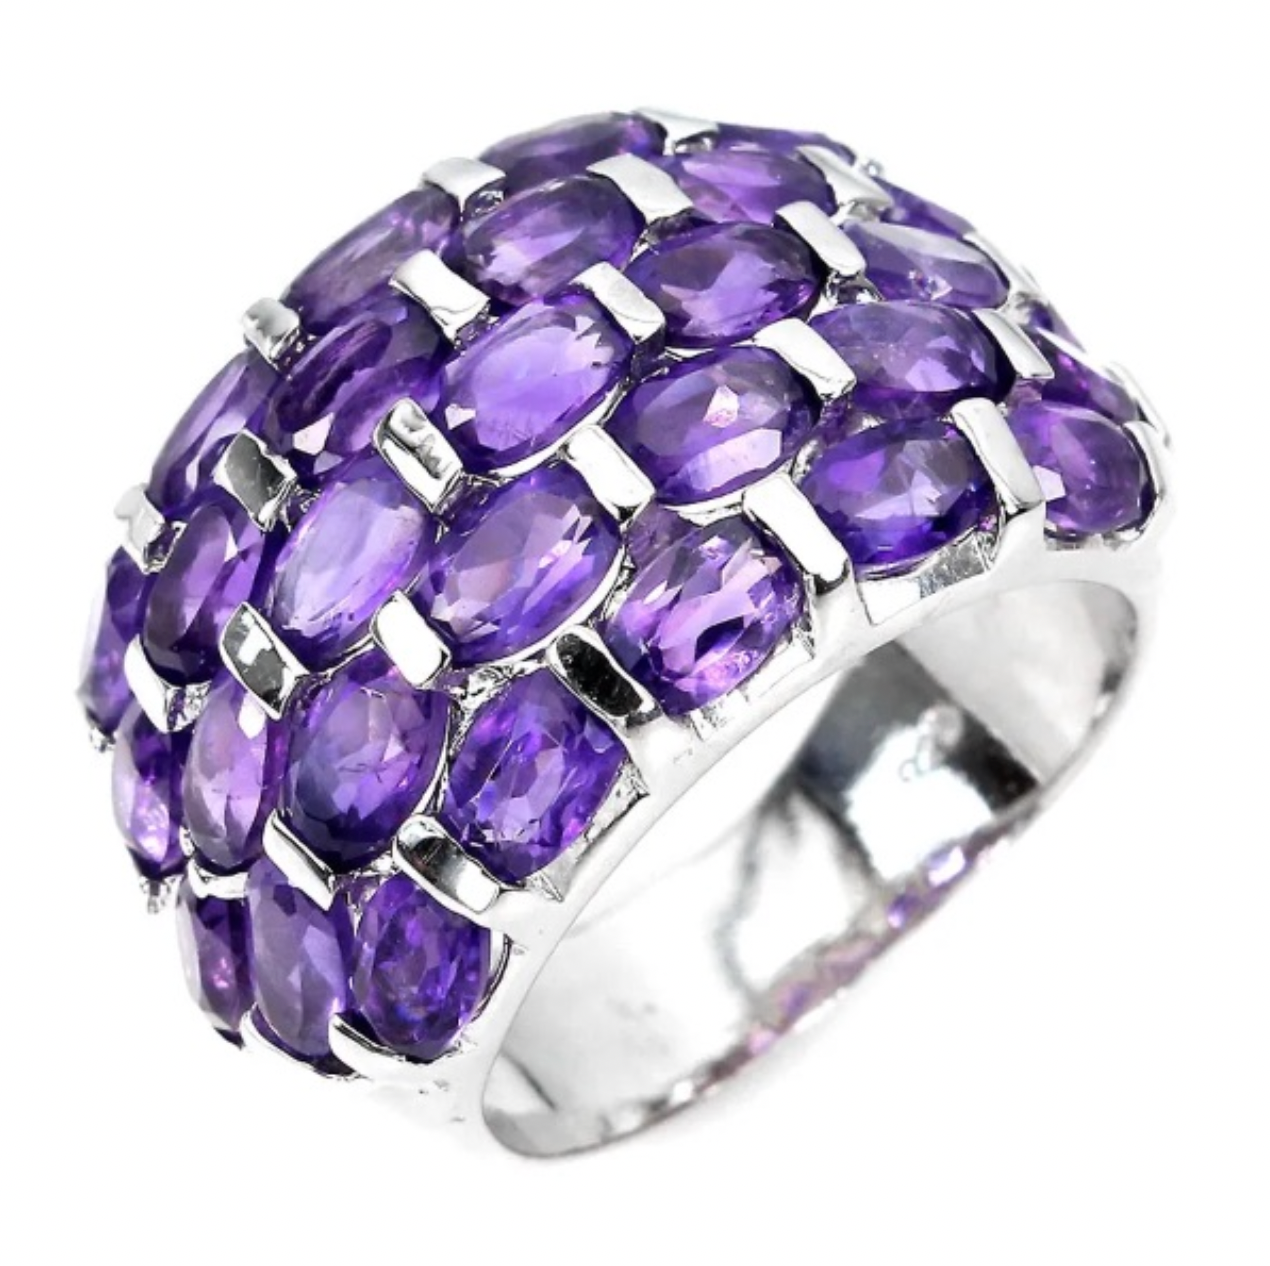 Natural Unheated Purple Amethyst, White Cz Solid .925 Silver 14K white Gold Ring 7.5 or P - BELLADONNA